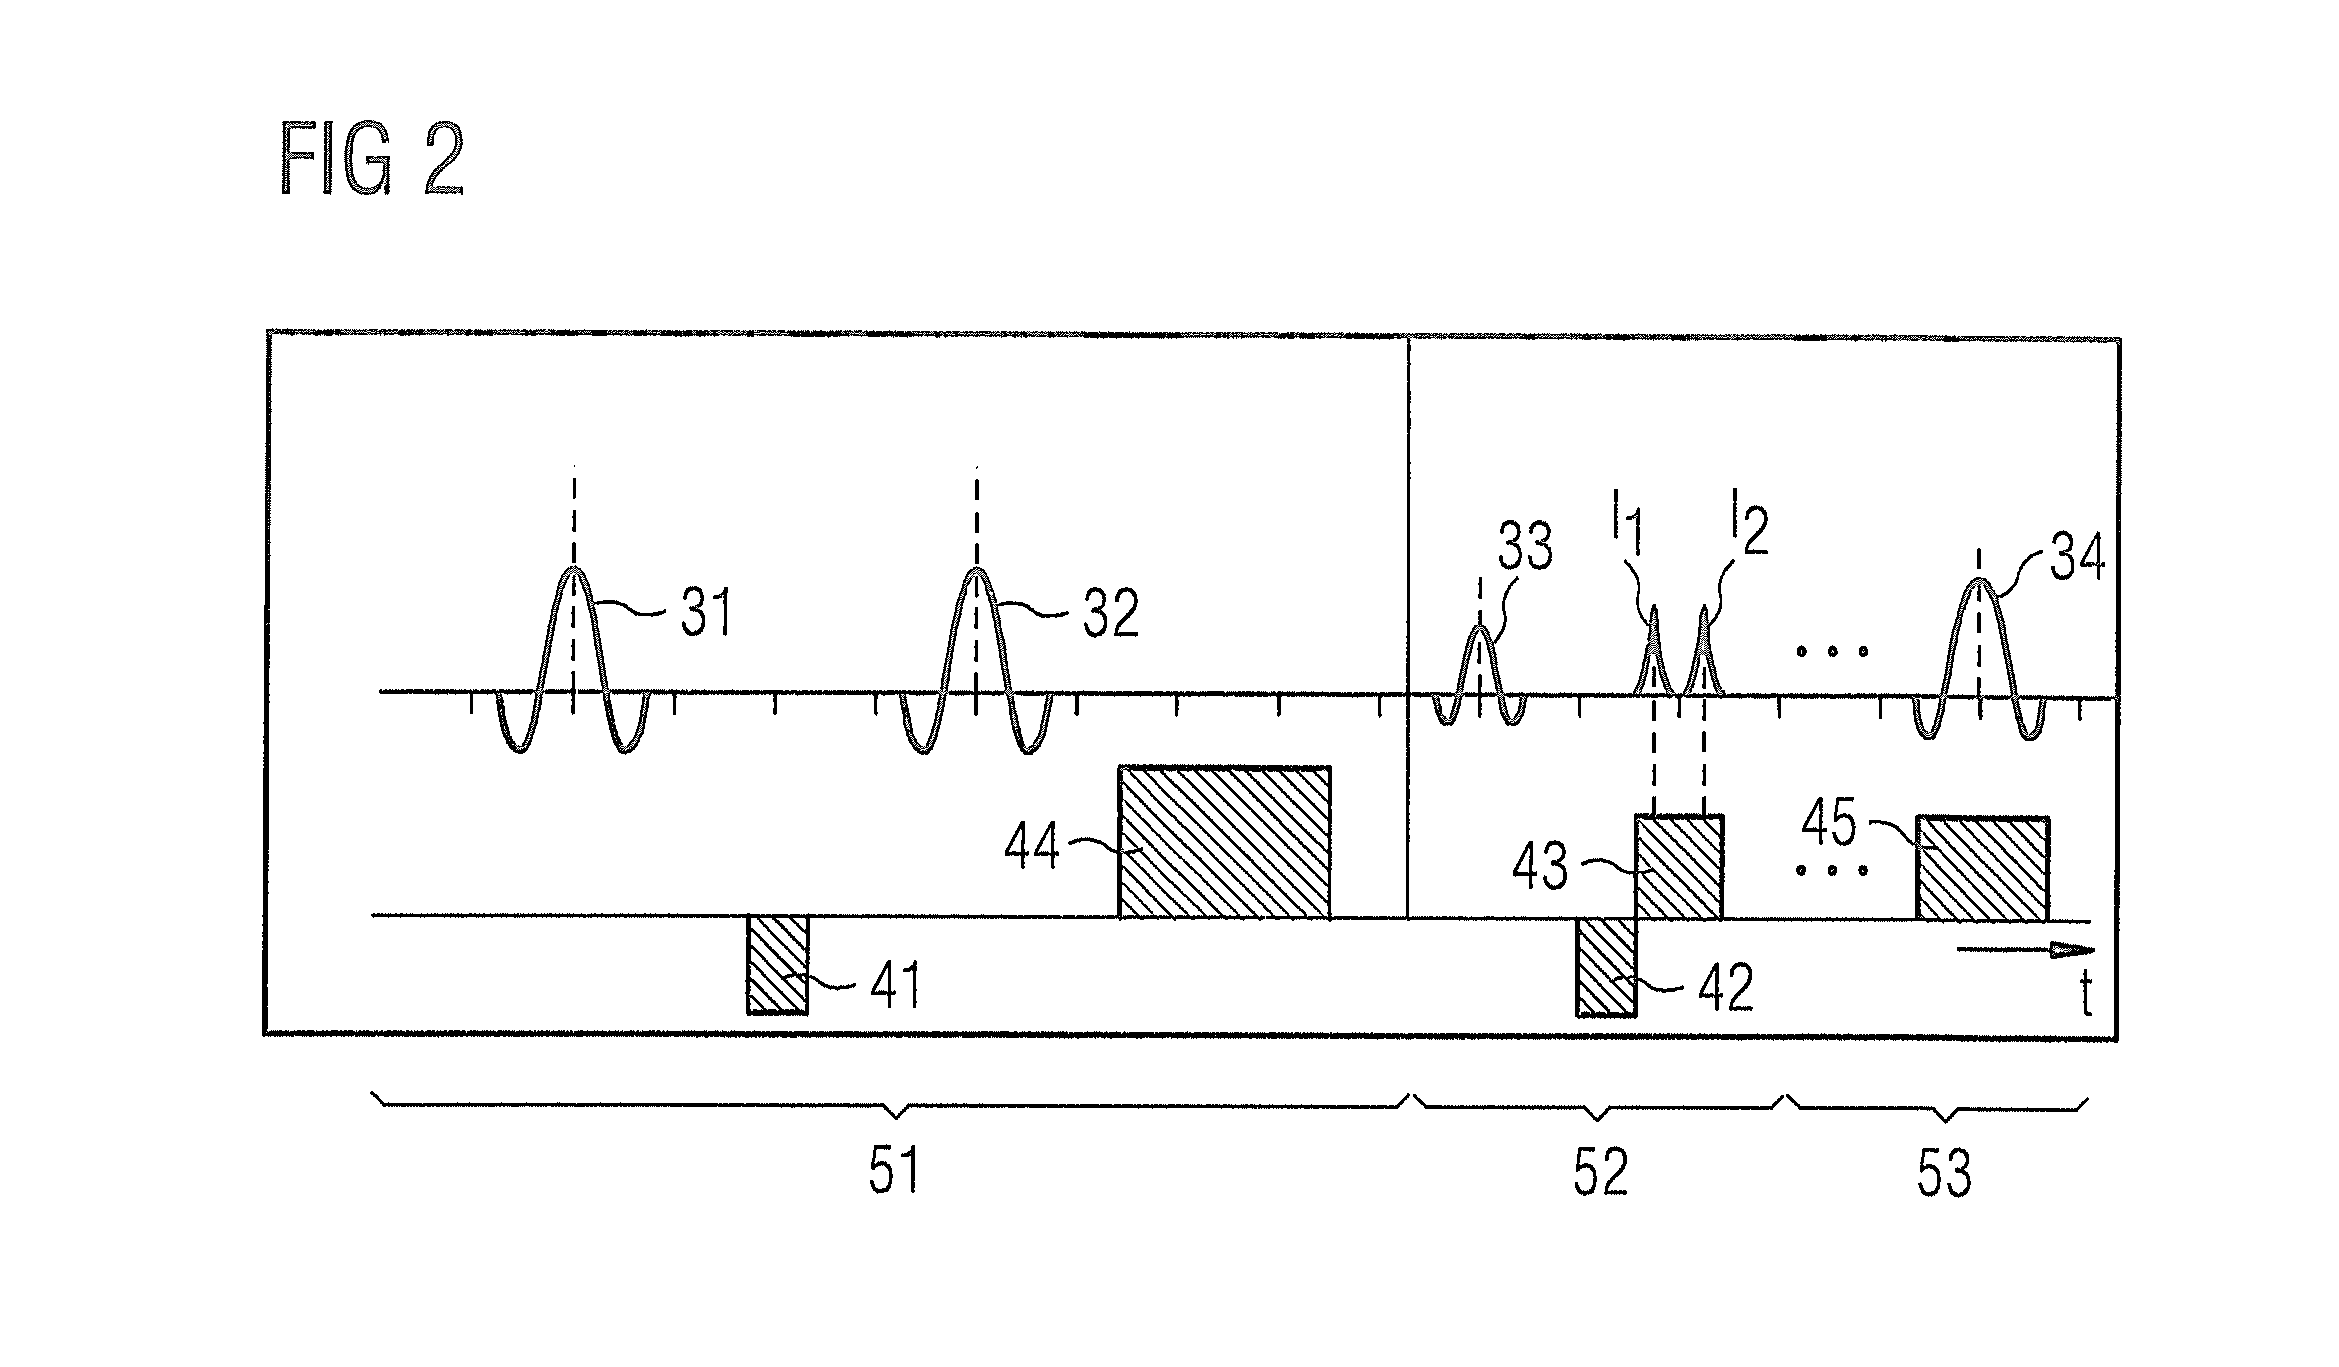 Magnetic resonance system and method to acquire mr data and to determine a b1 magnetic field